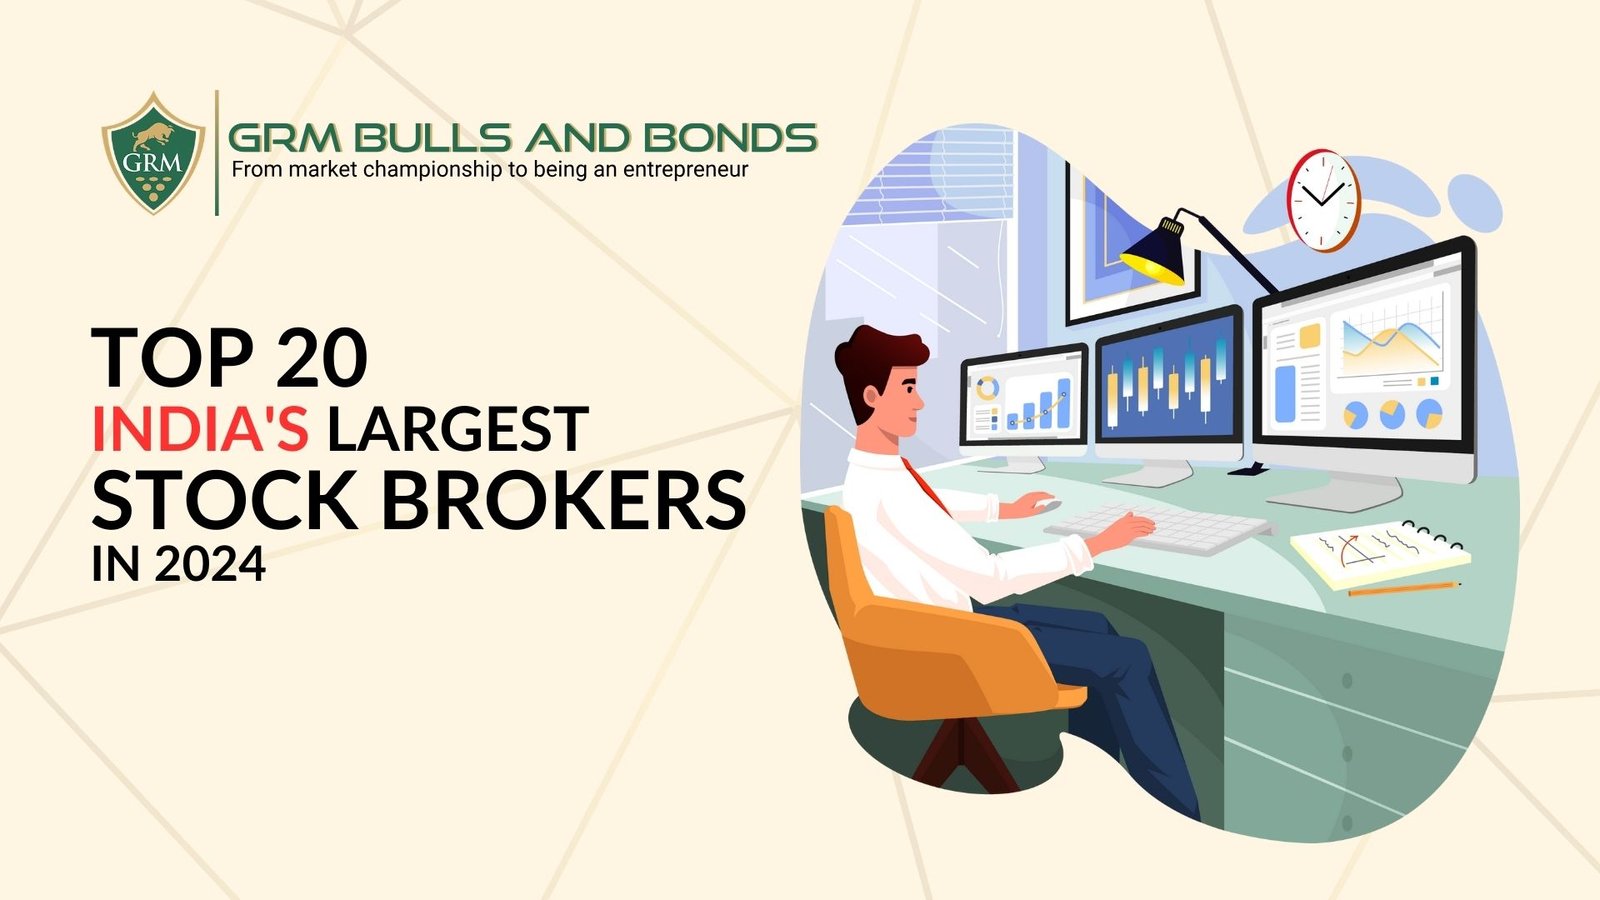 Top 20 India's Largest Stock Brokers in 2024